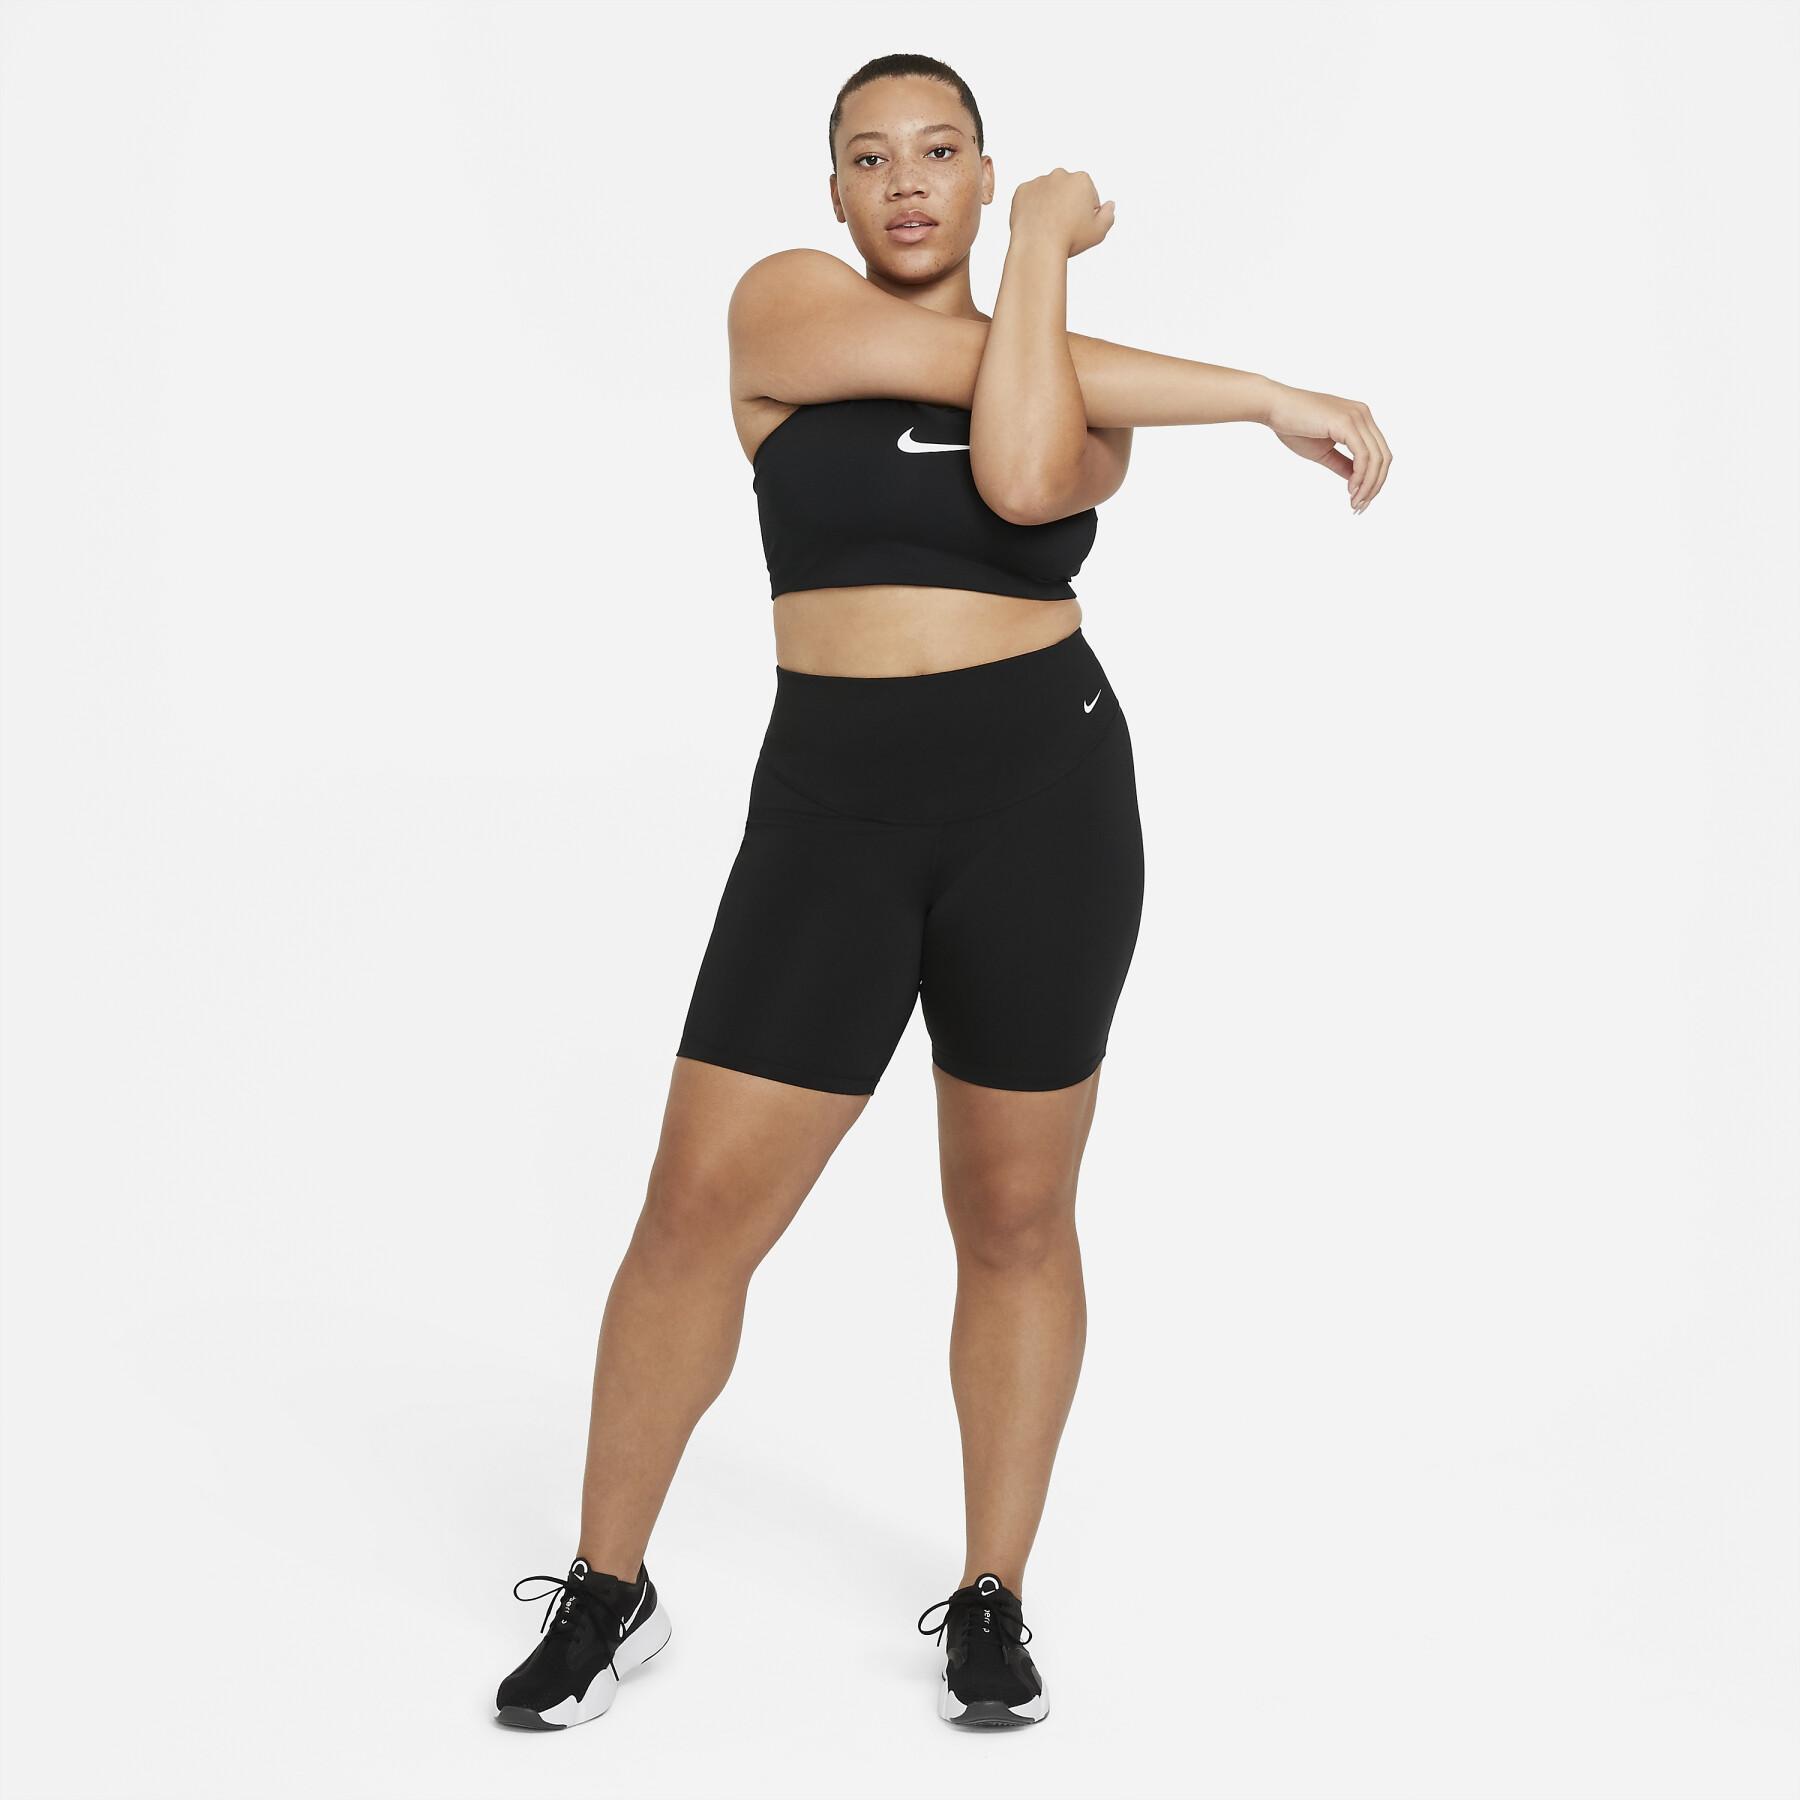 Cuissard mi-taille femme Nike One 7 "